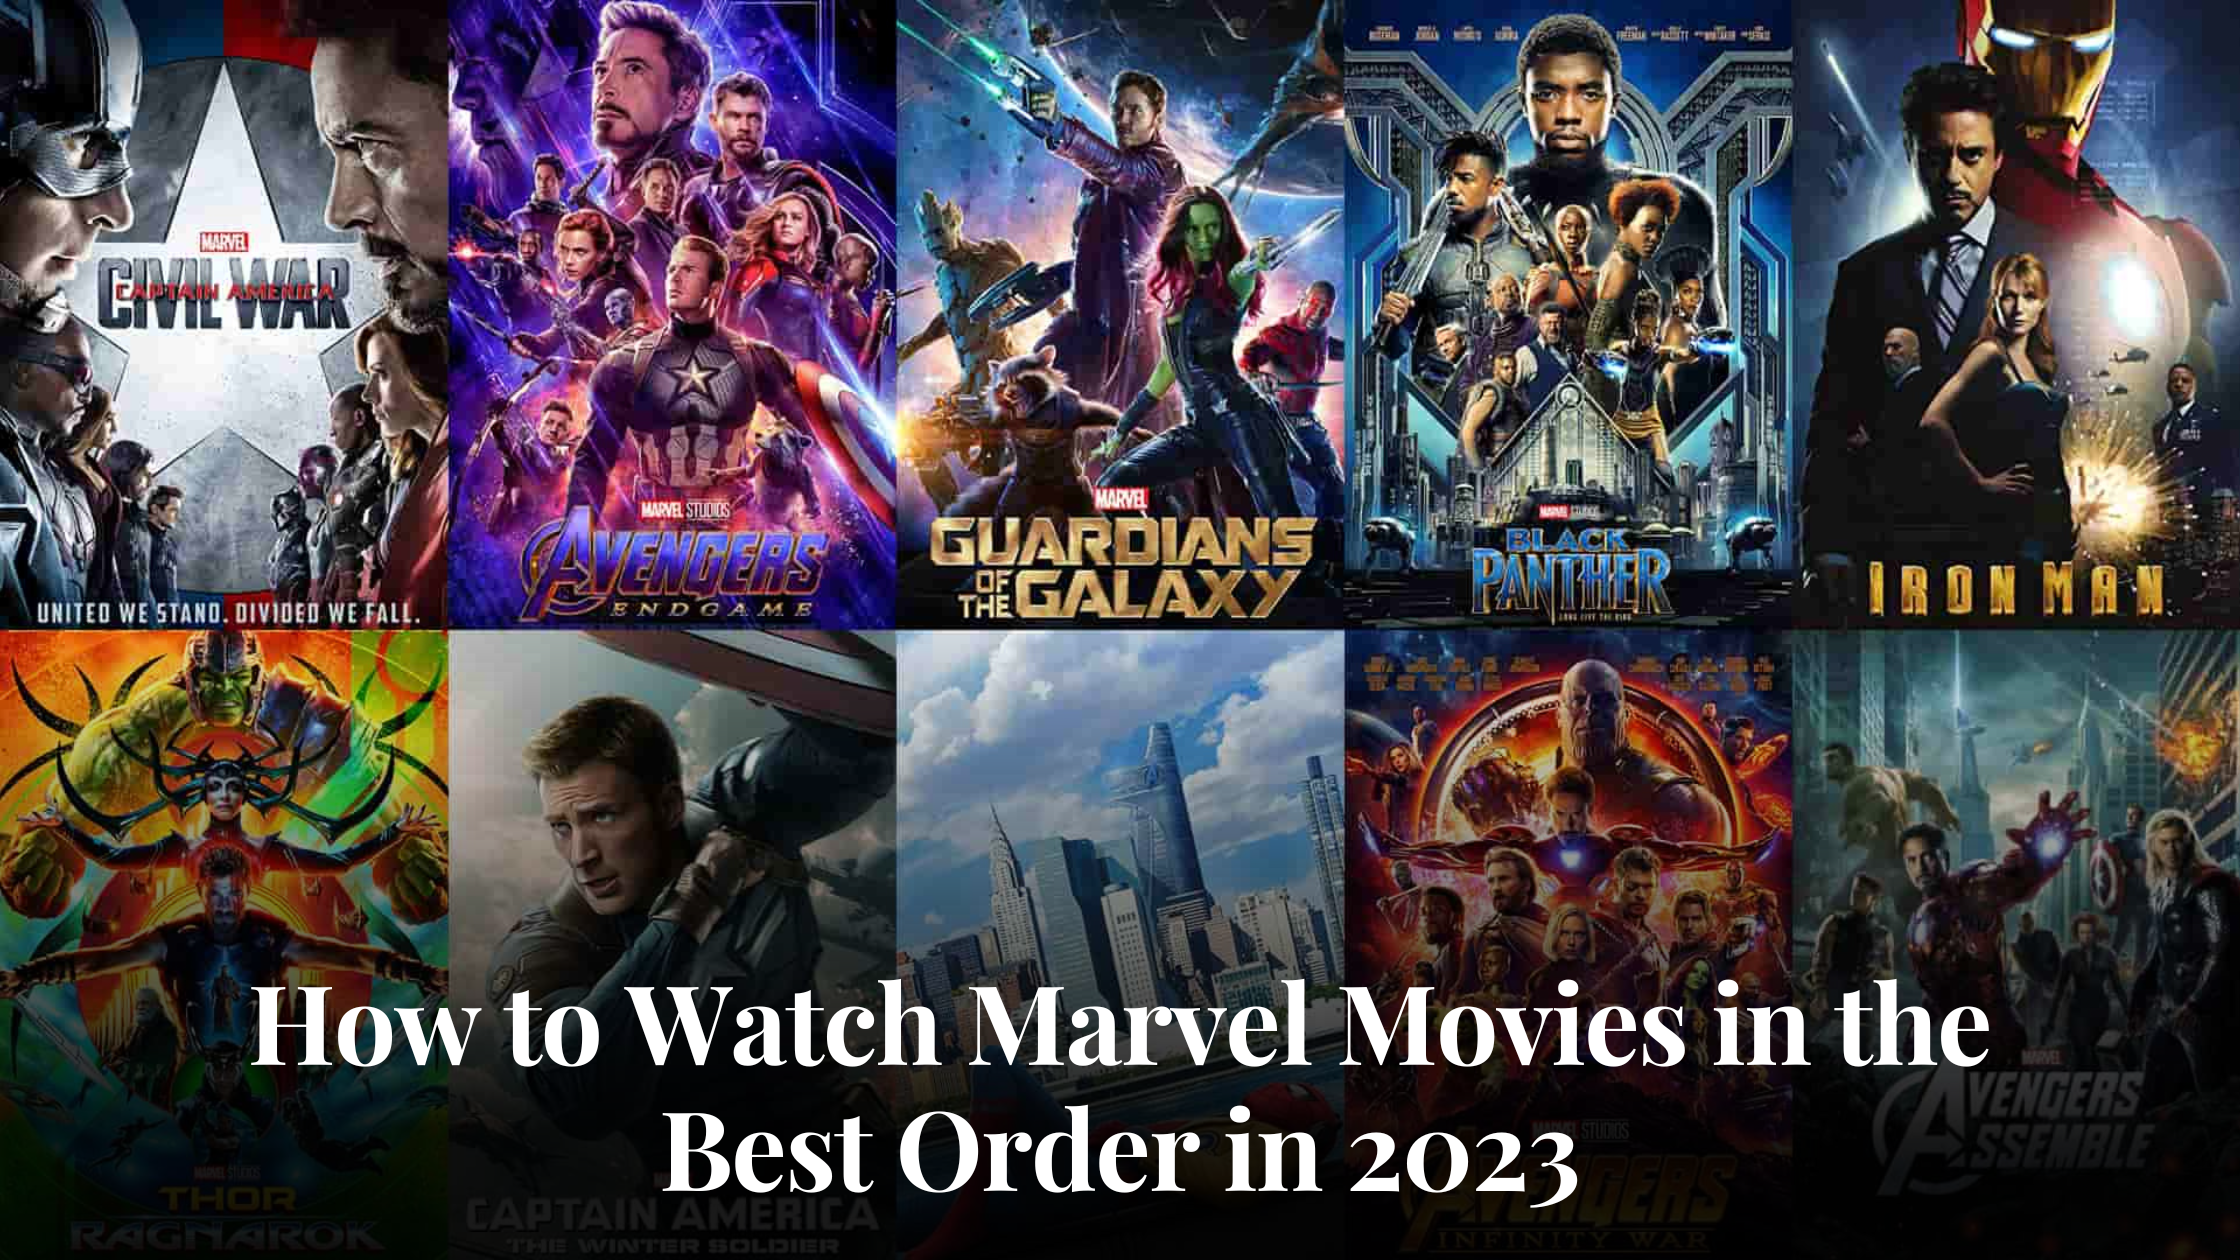 How to Watch Marvel Movies in the Best Order in 2023